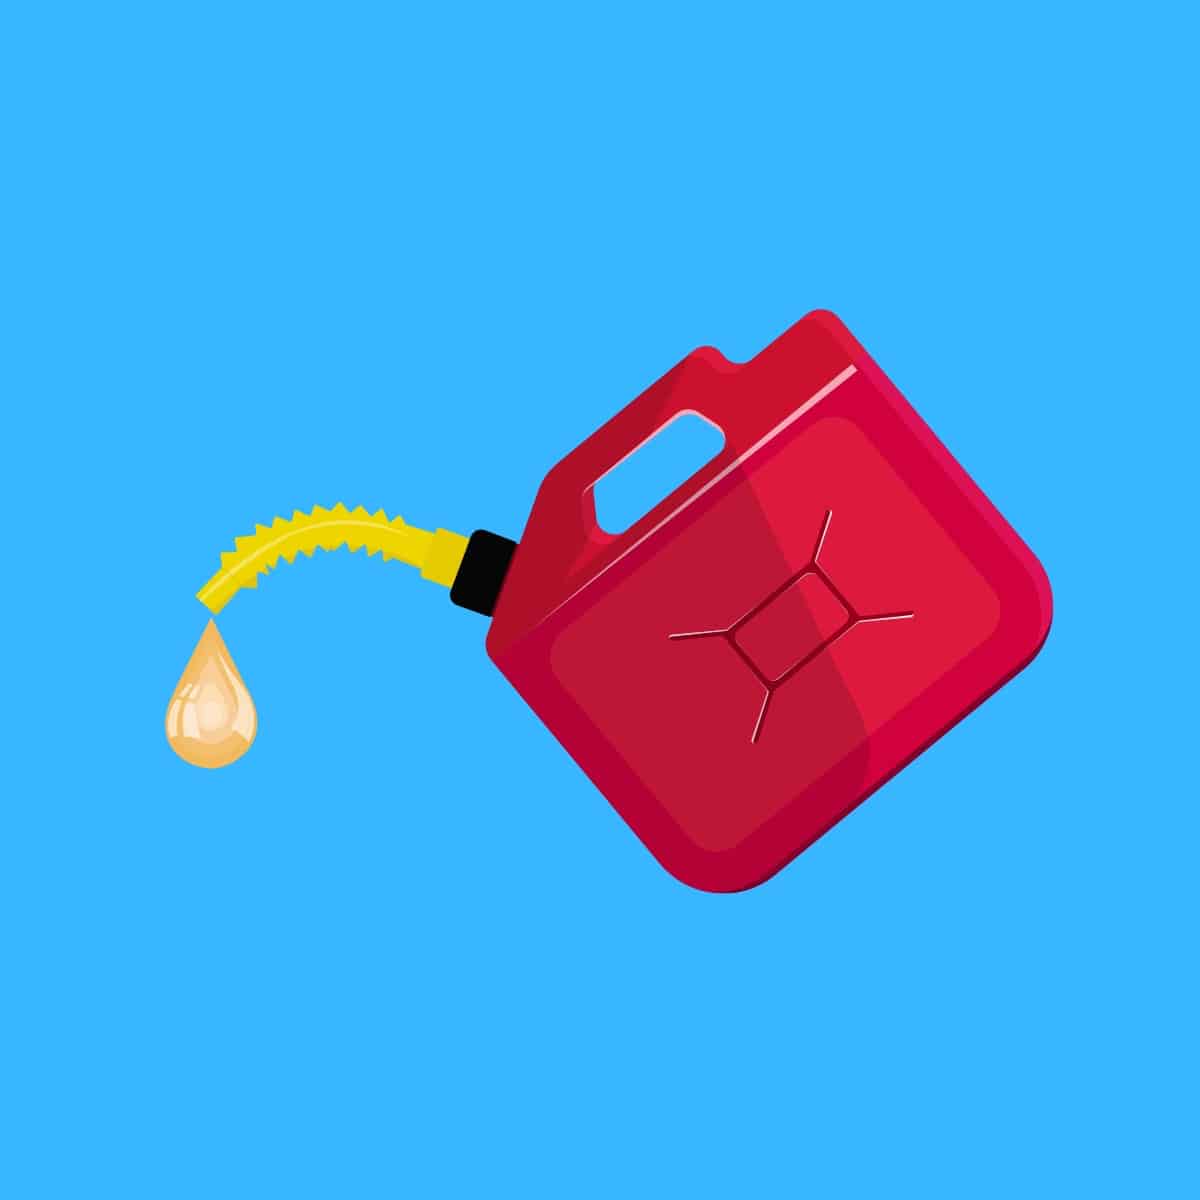 Cartoon graphic of a red gas tank on a blue background.